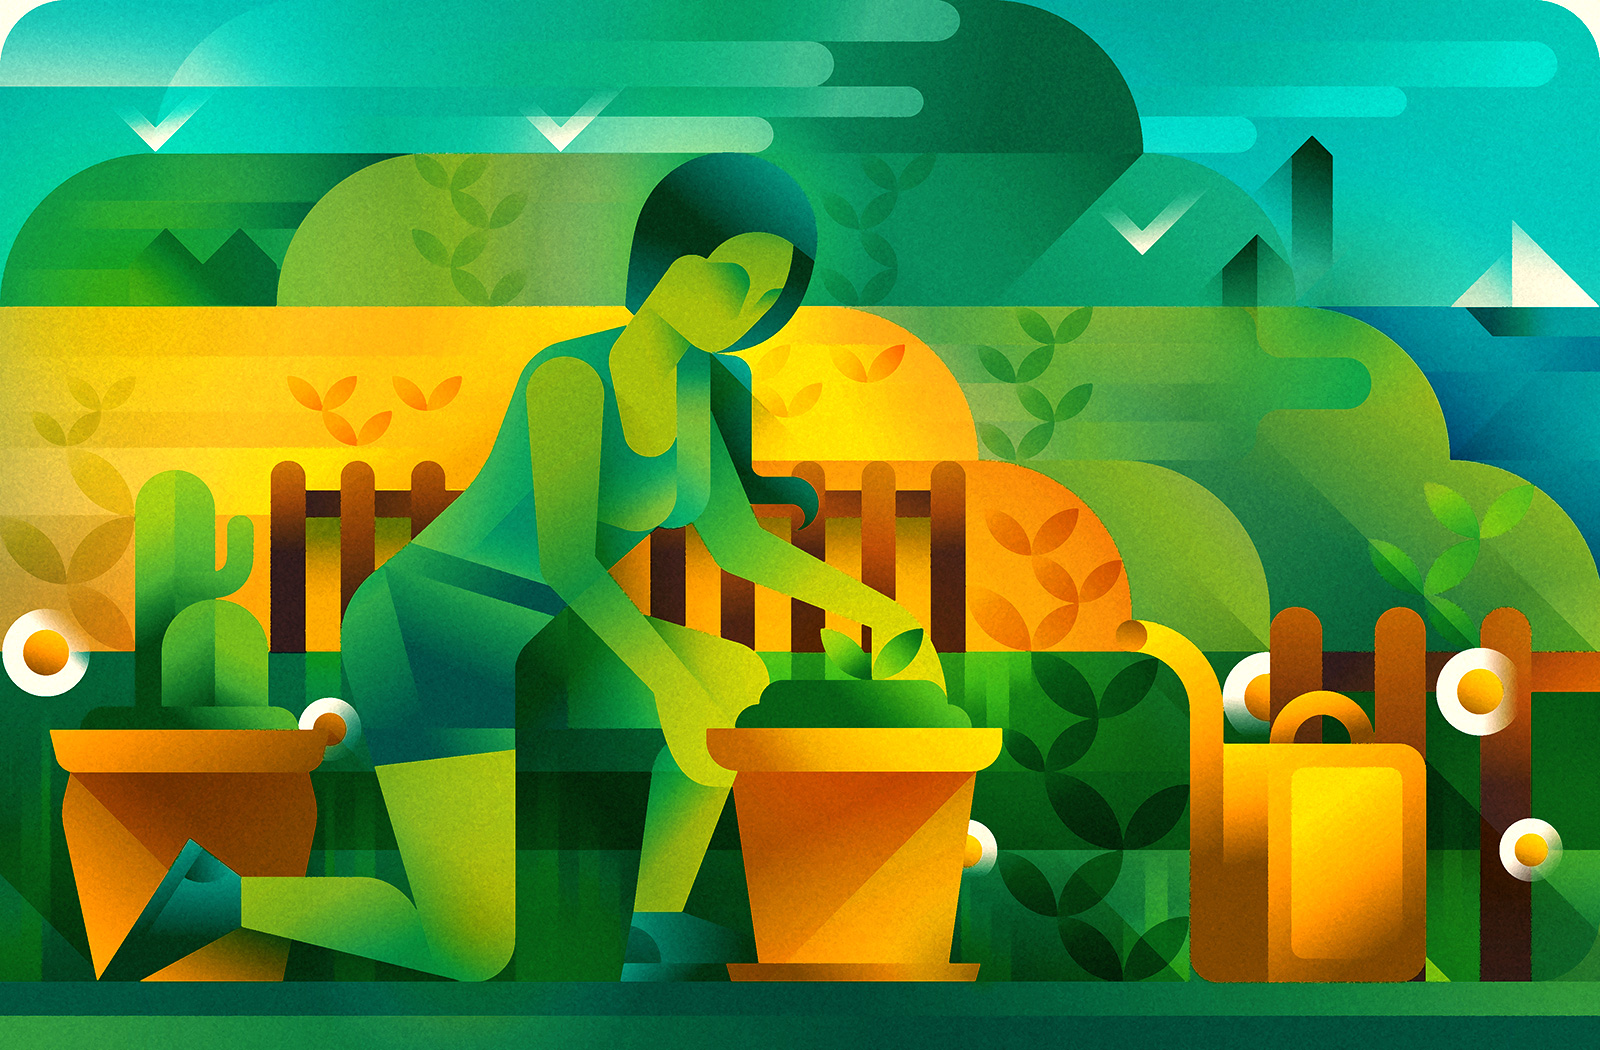 A woman with green skin working on her garden next to the sea, illustration by Francesco Faggiano illustrator